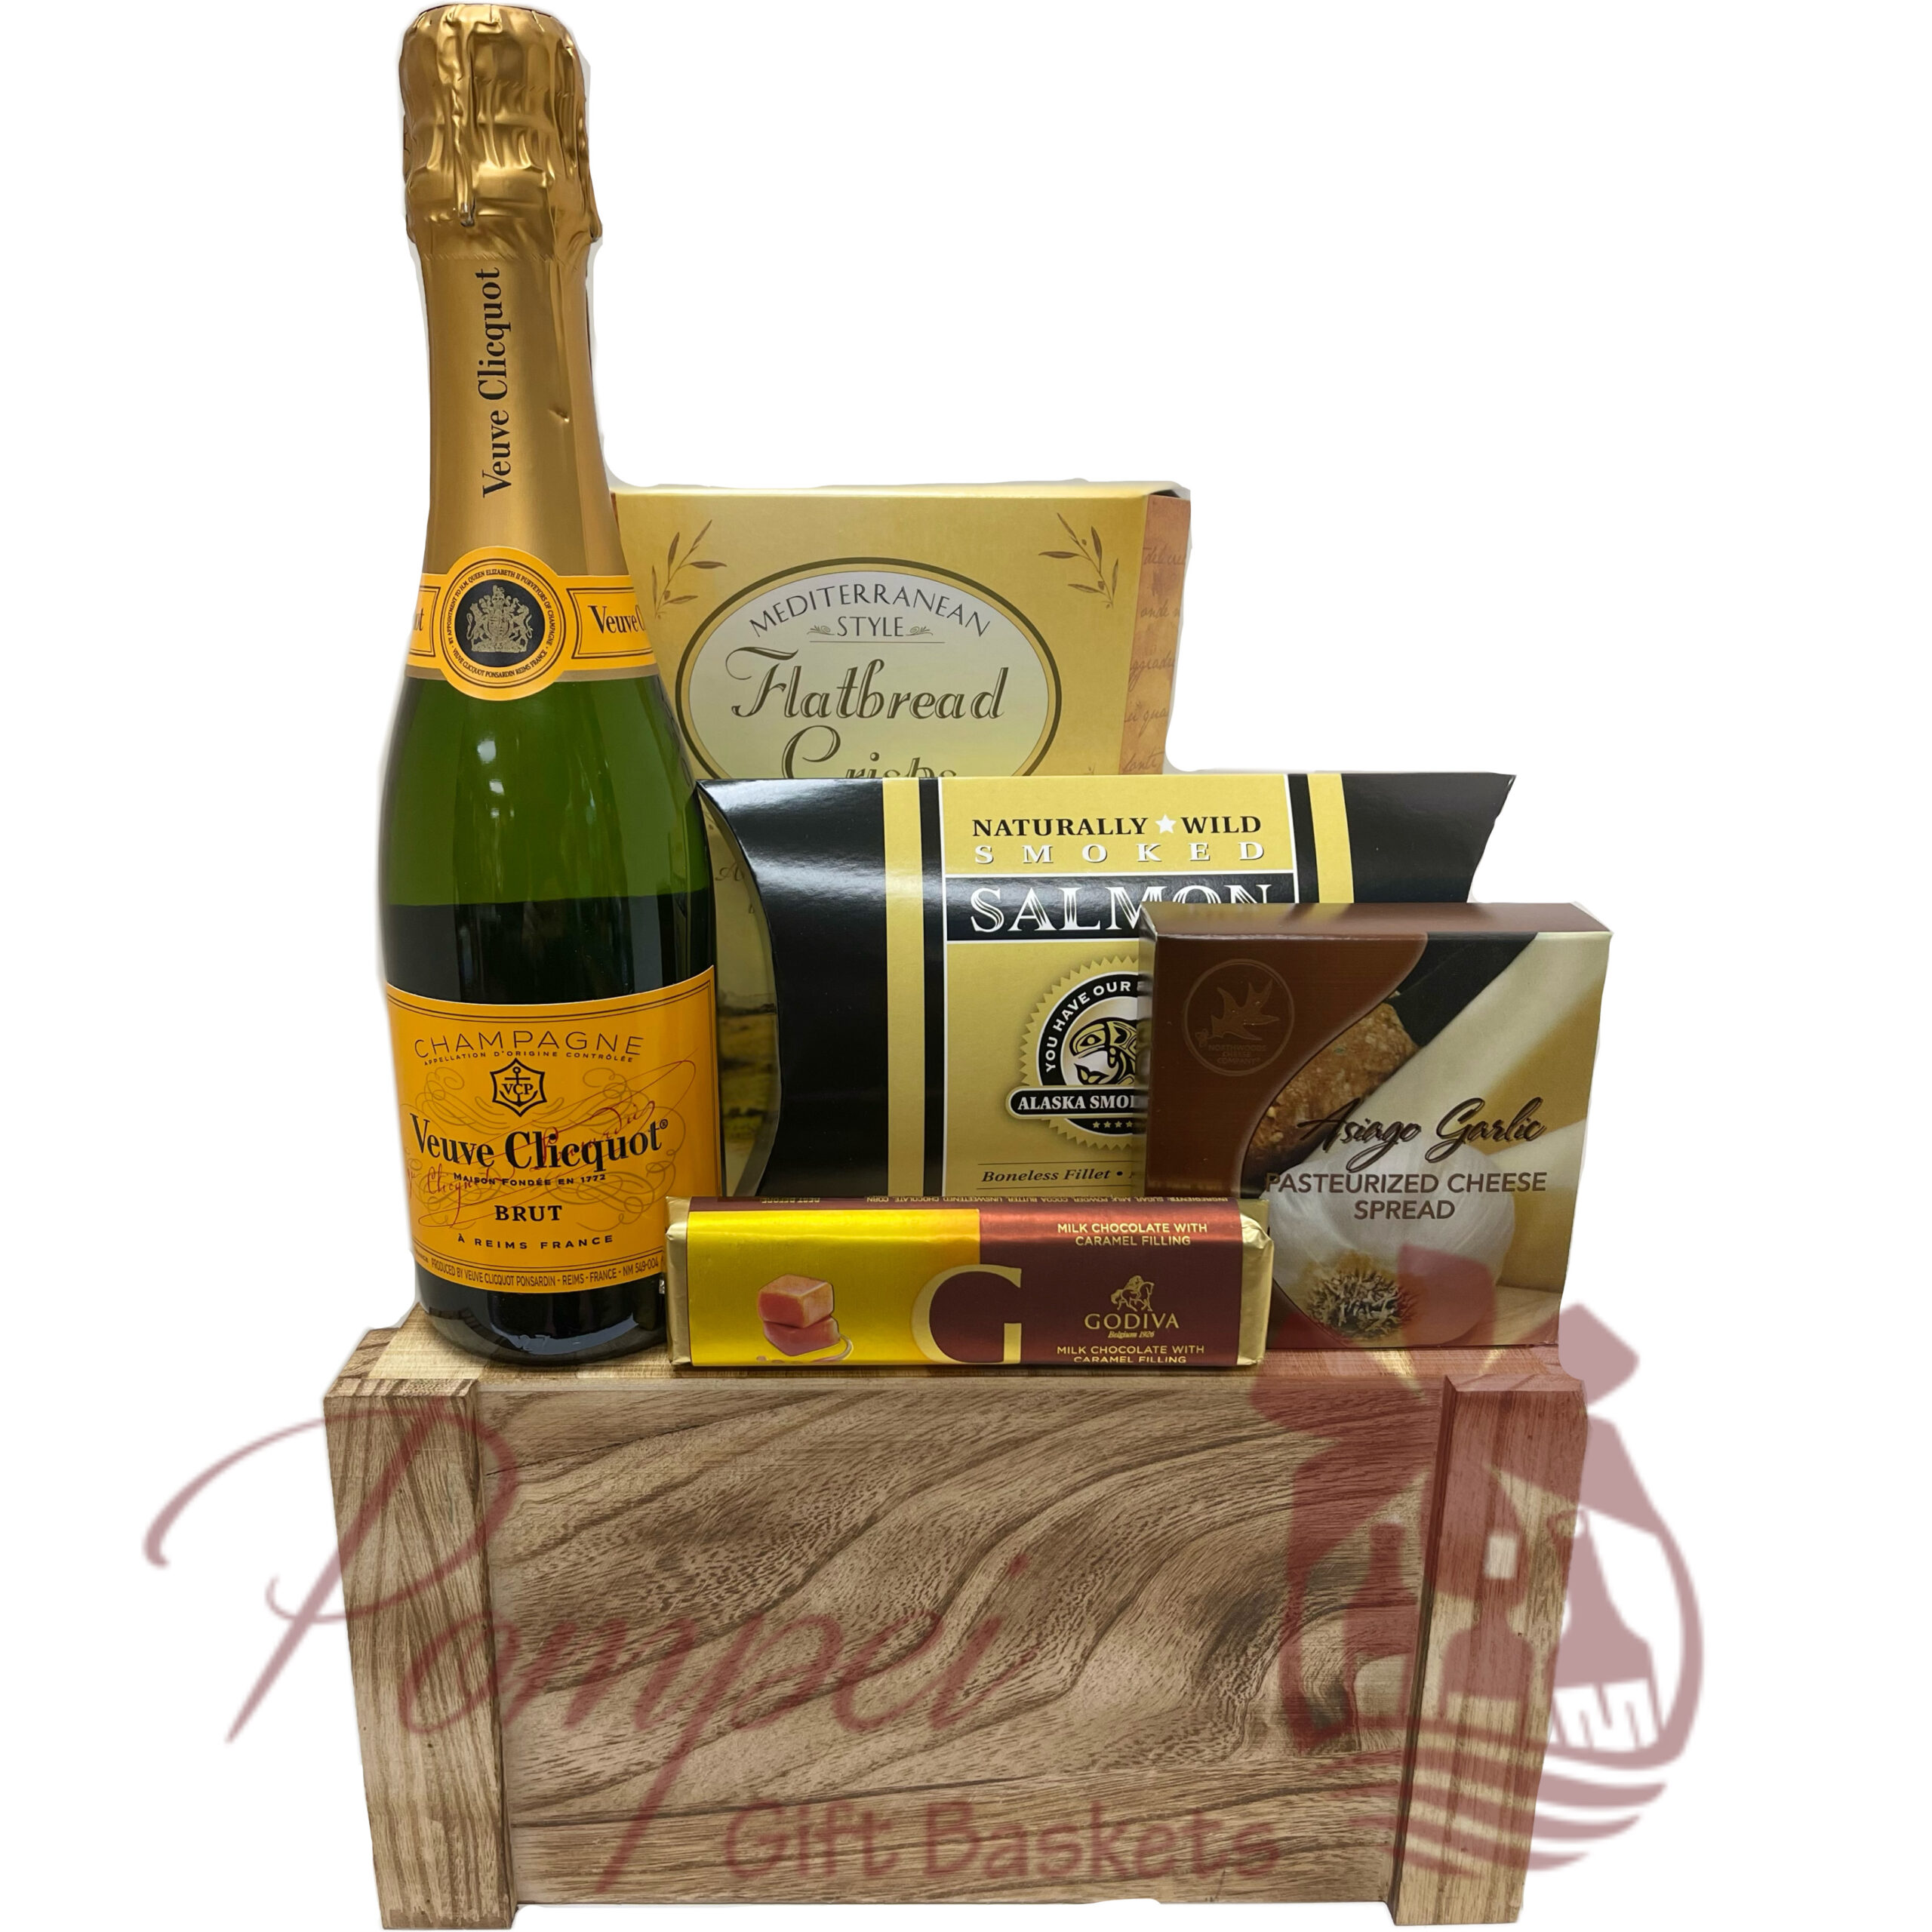 Veuve Cliquot Champagne Basket at Wine Country Gift Baskets